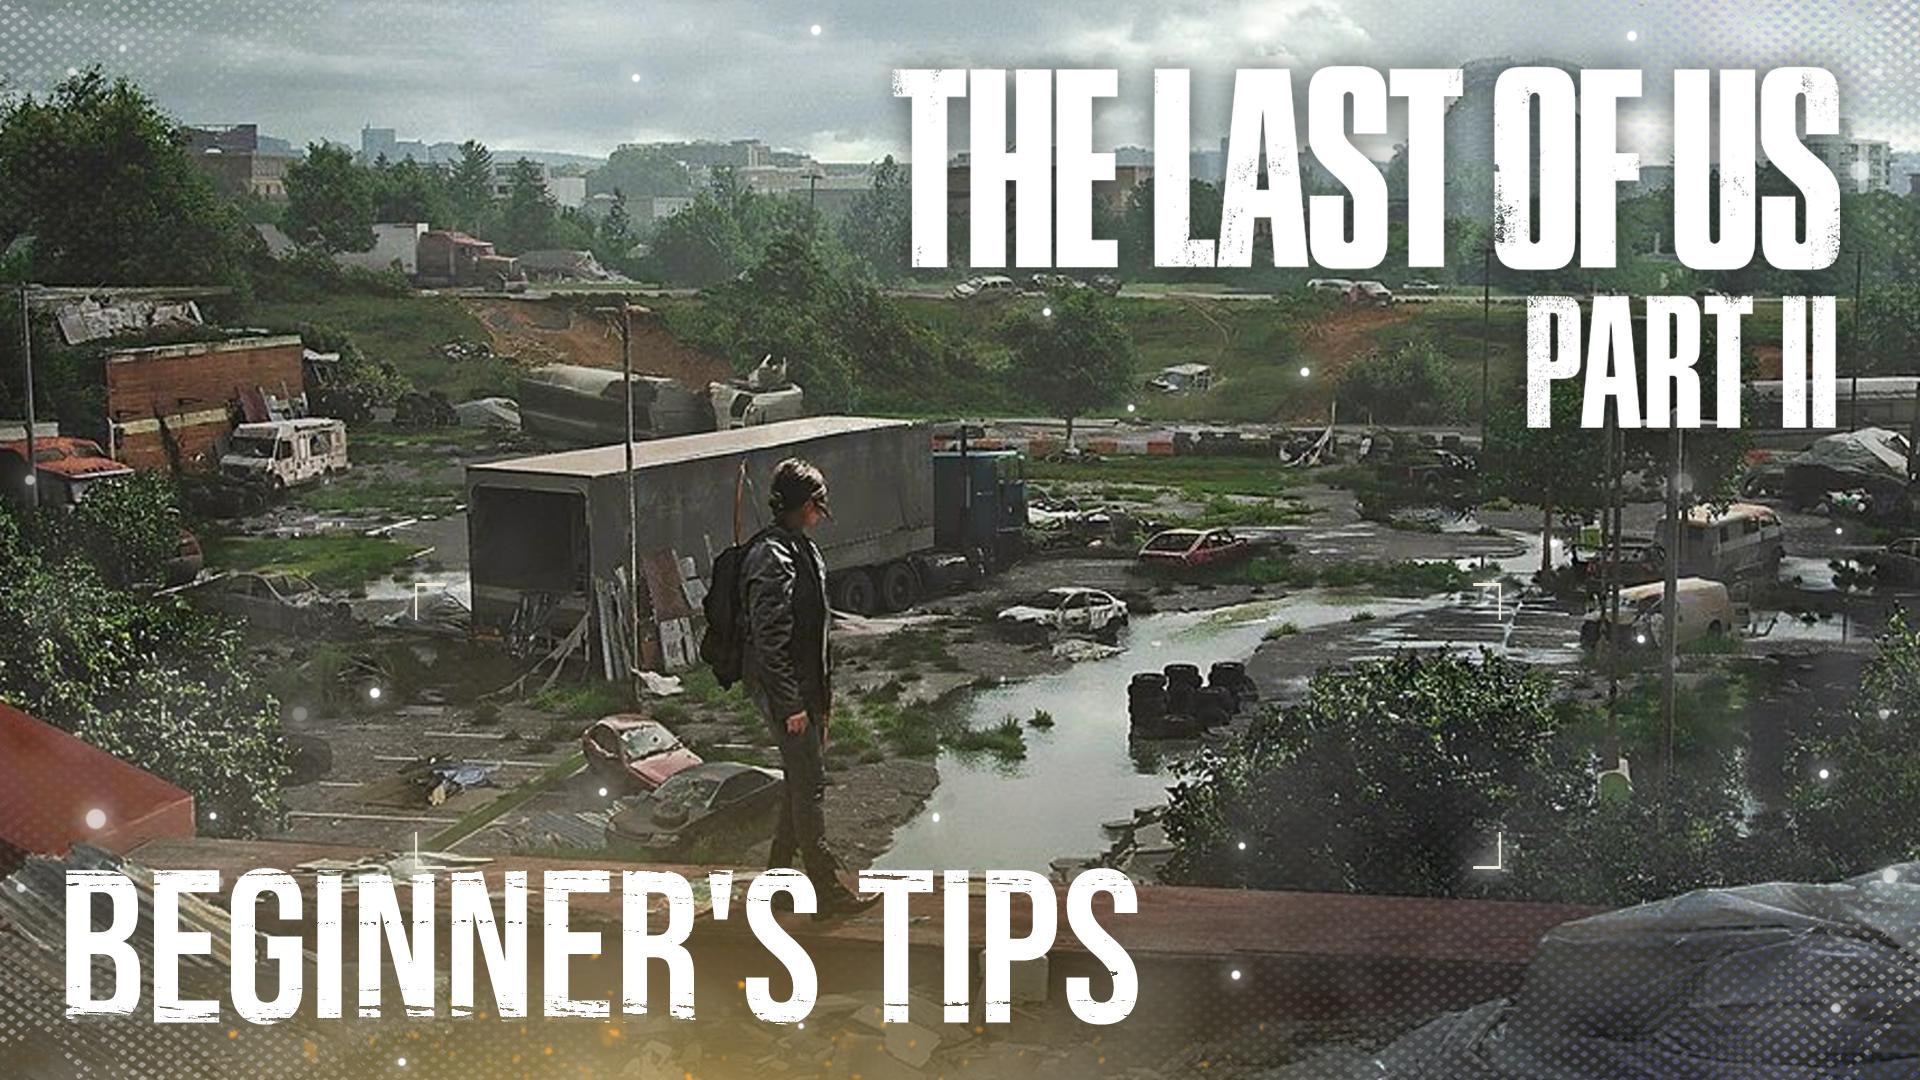 These beginner tips will help propel you through The Last of Us Part 2.